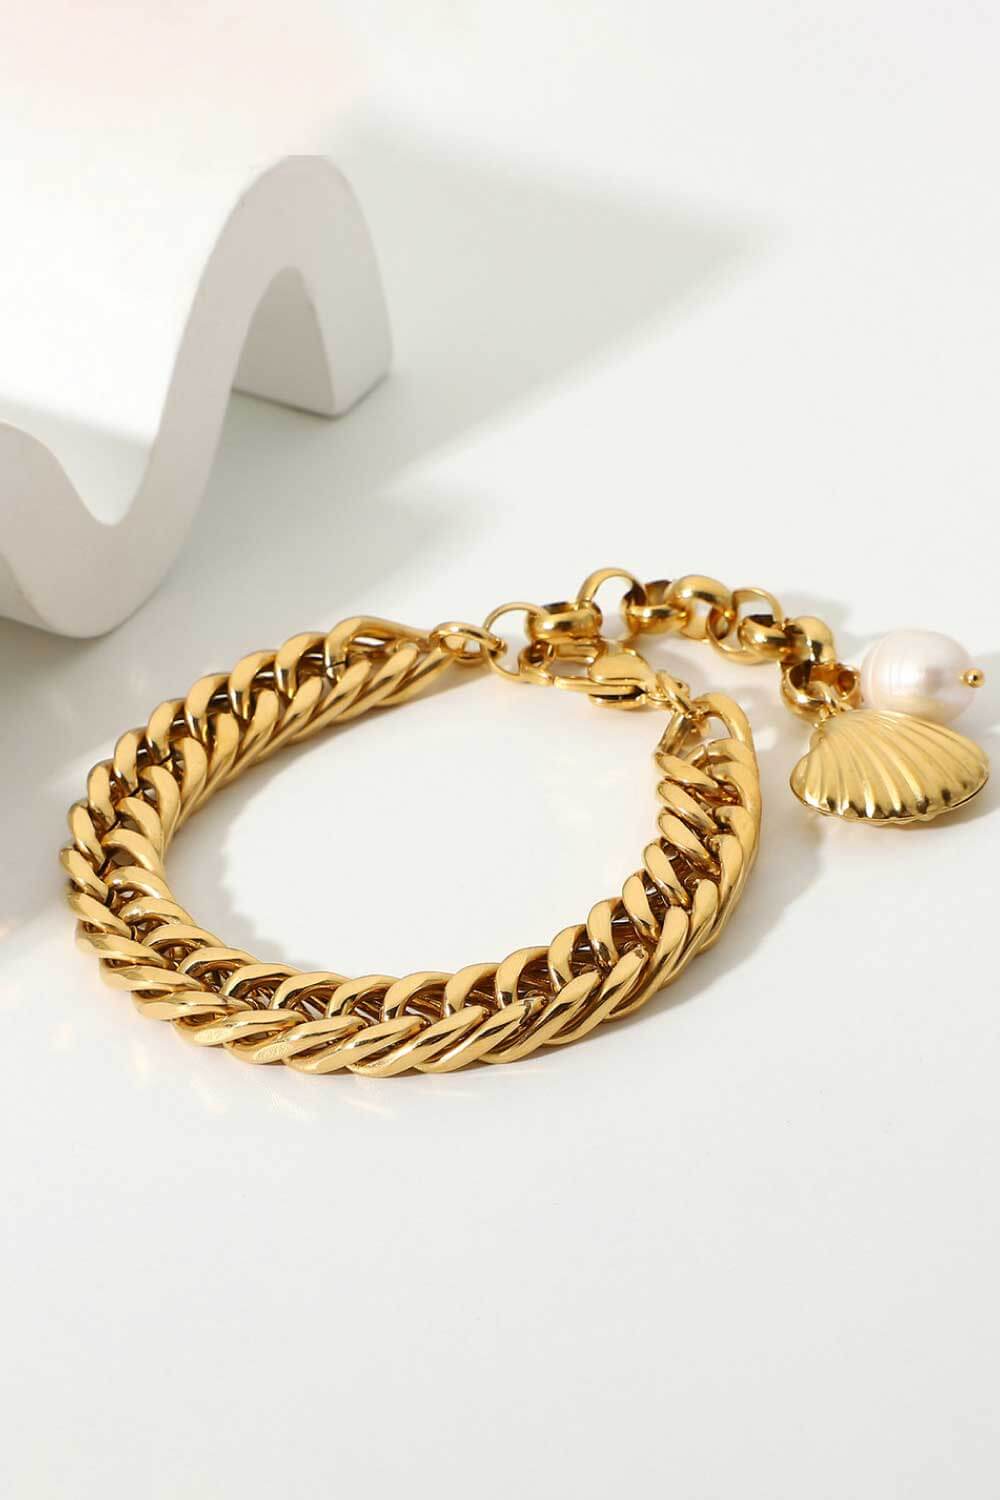 18K Gold-Plated Curb Chain Bracelet